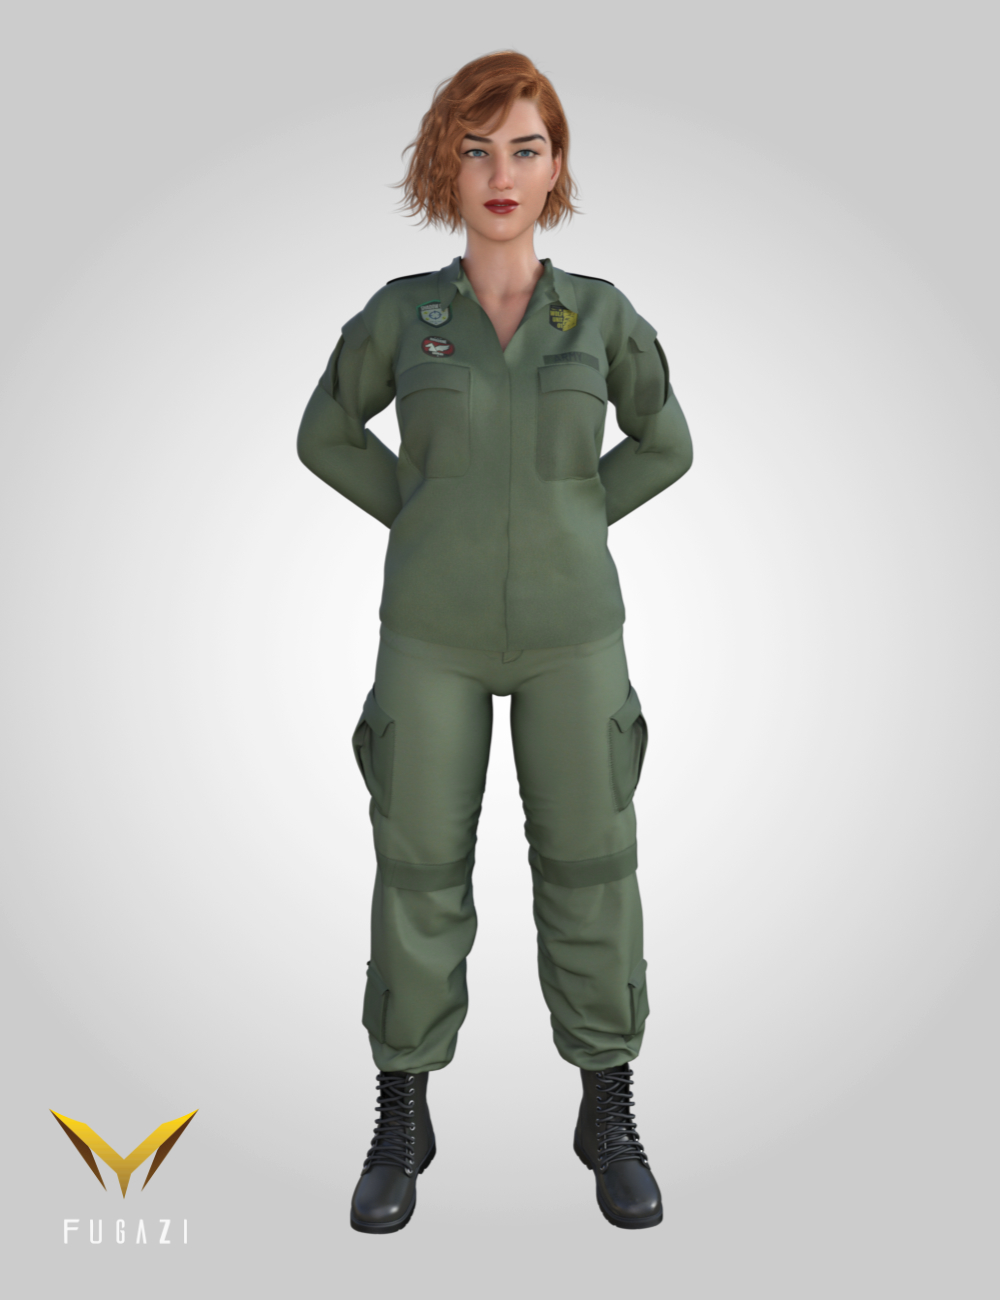 FG Military Outfit for Genesis 8.1 Female by: Ironman, 3D Models by Daz 3D